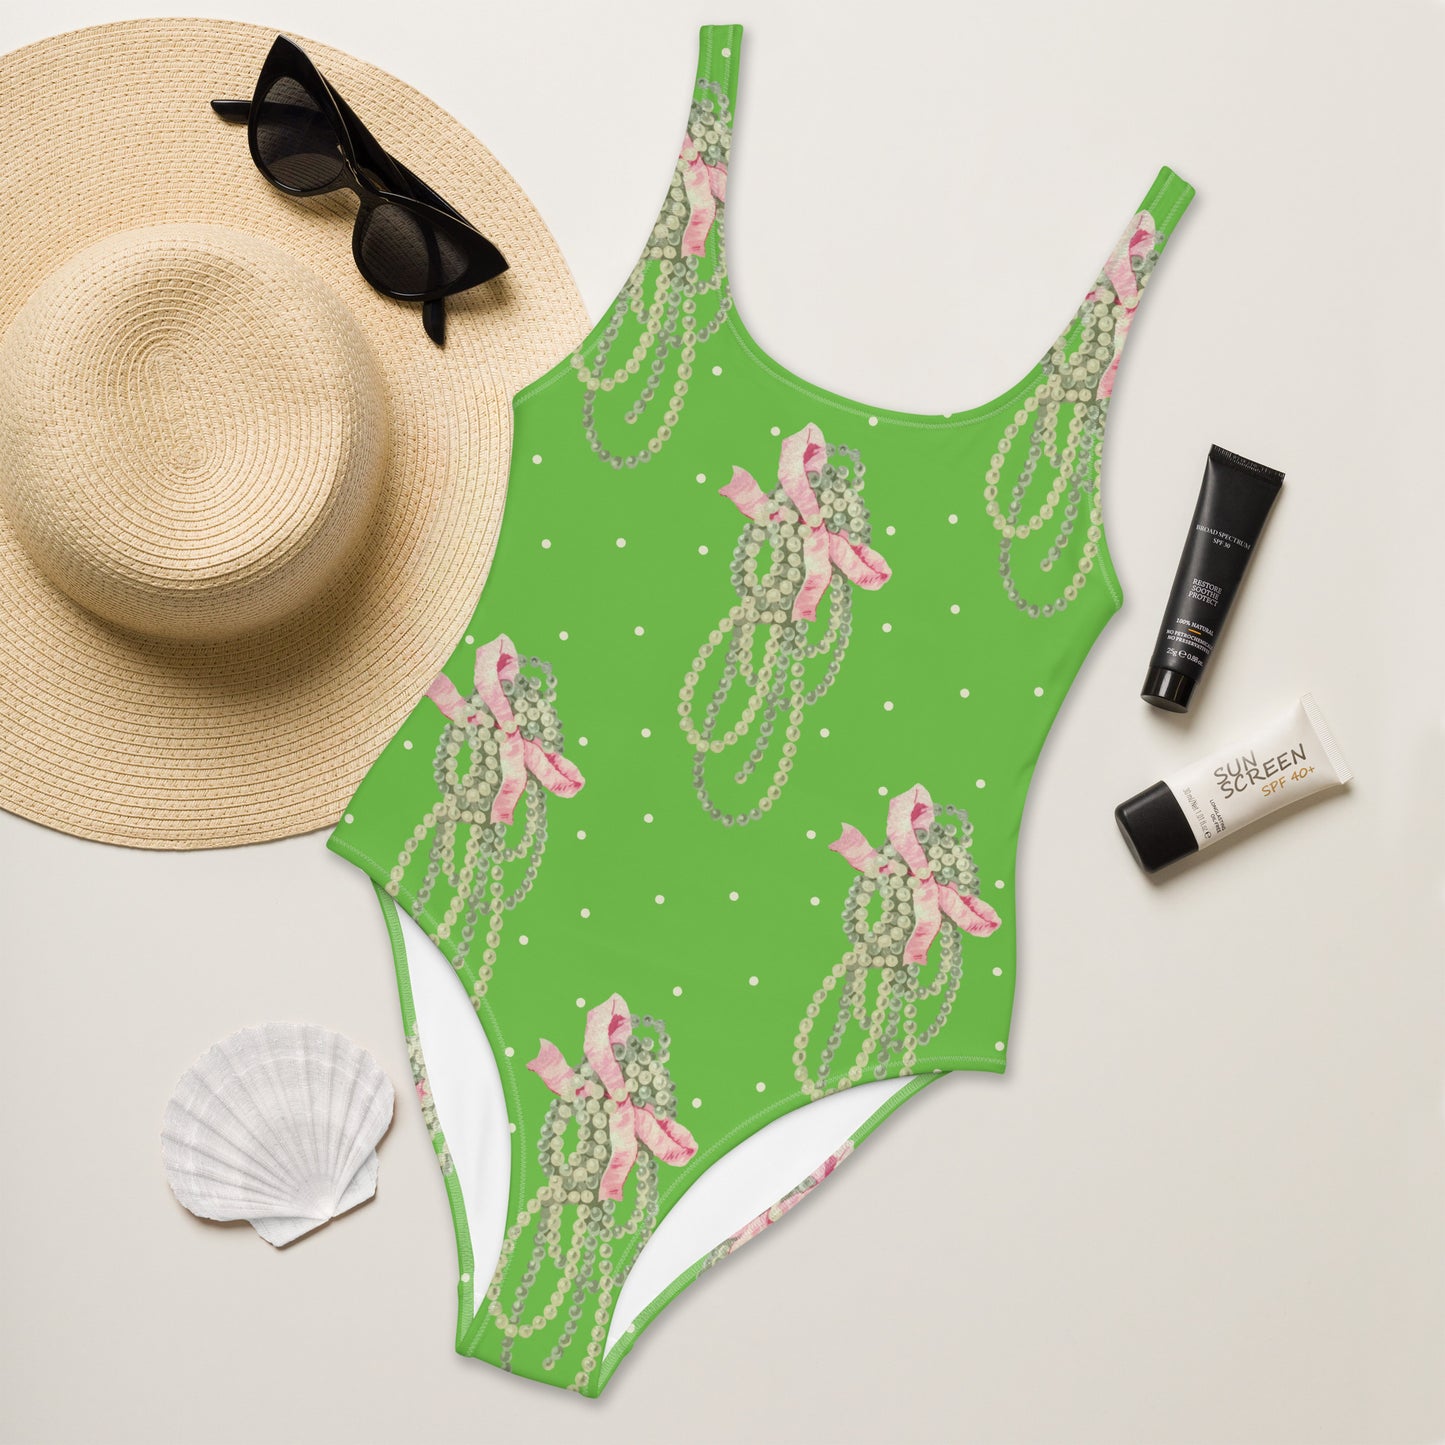 Vintage Pearl Apple Green One-Piece Swimsuit